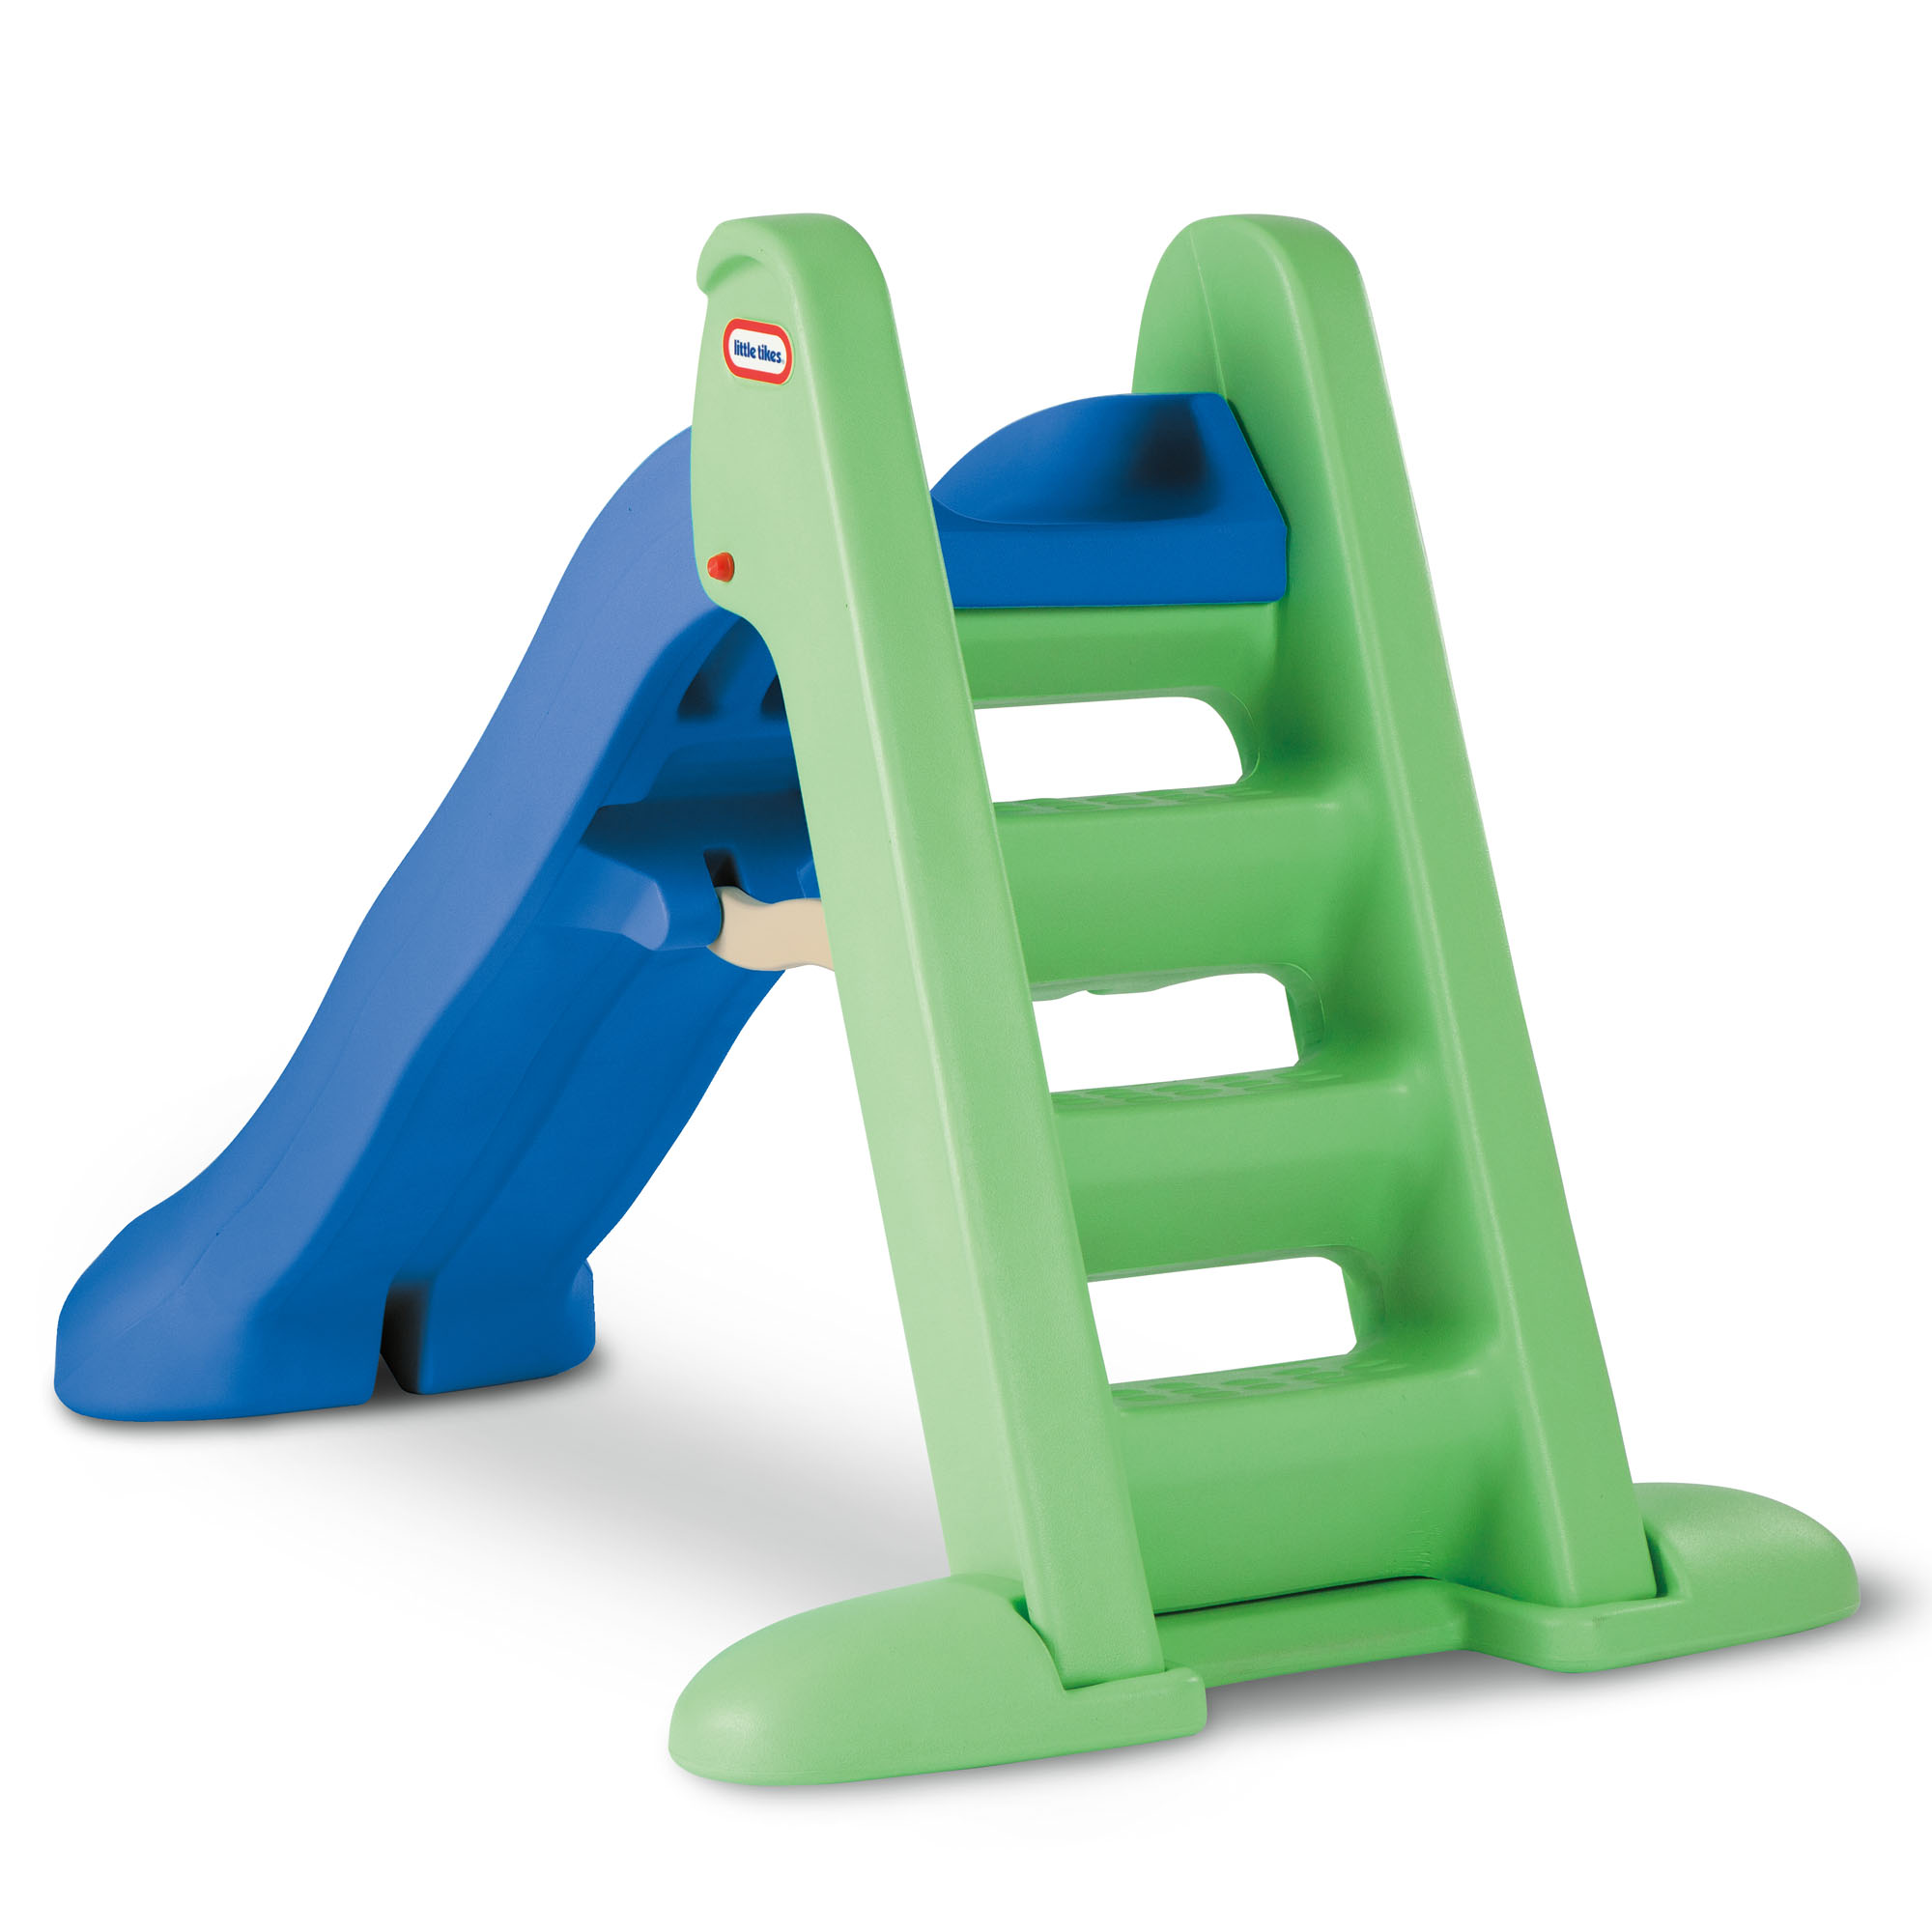 Little Tikes Easy Store Large Playground Slide with Folding for Easy Storage, Outdoor Indoor Active Play, Blue and Green- For Kids Toddlers Boys Girls Ages 2 to 6 Year old - image 5 of 5